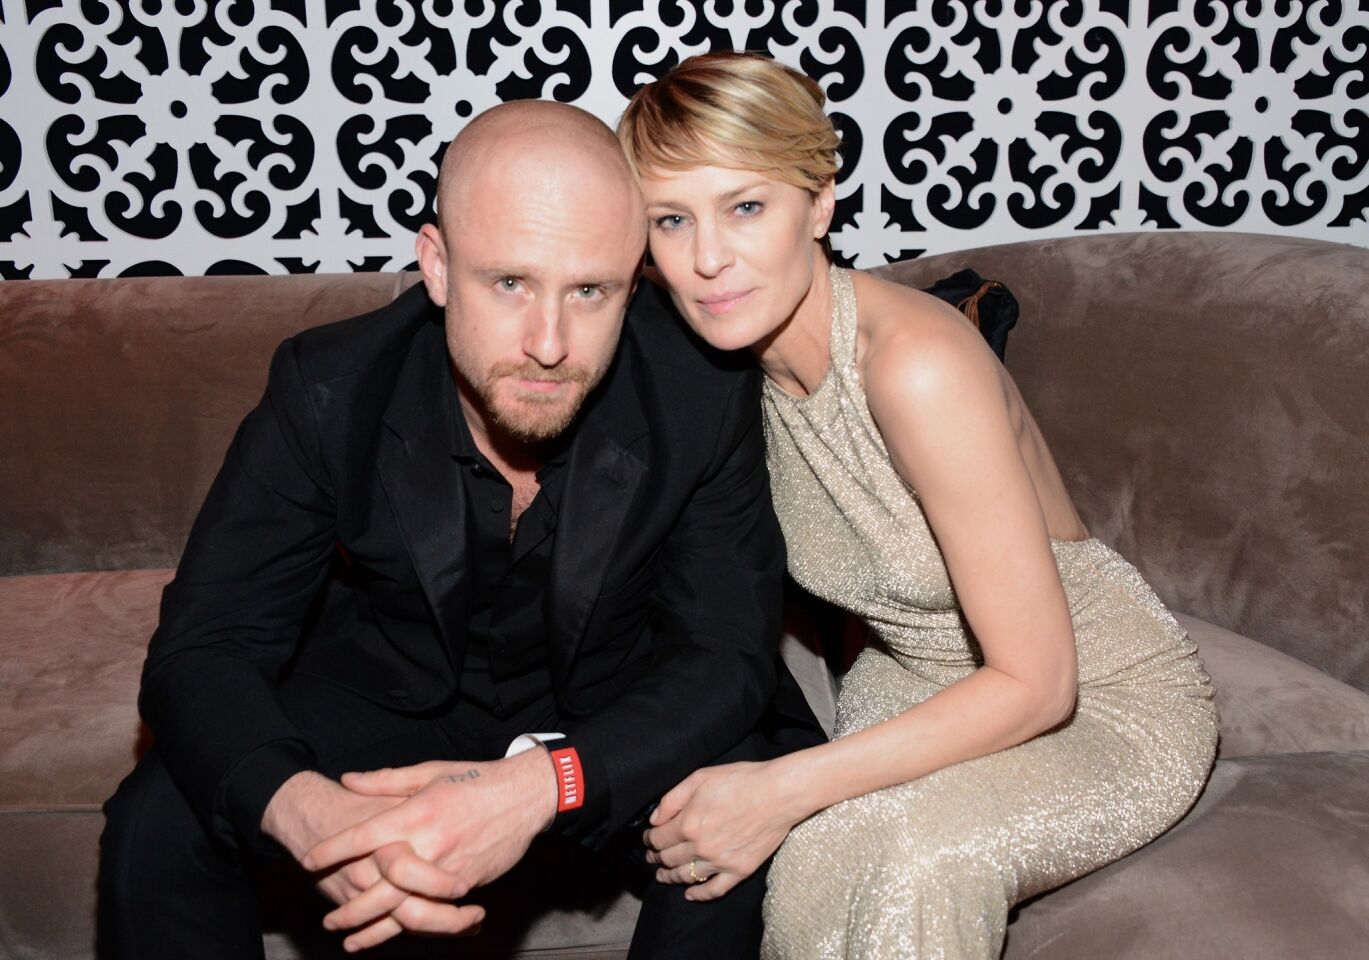 News that "House of Cards" star Robin Wright was engaged to "Lone Survivor" actor Ben Foster broke the same weekend she won the Golden Globe for best actress in a TV drama at the 71st Golden Globe Awards. Wright, 47, wore a ring on that finger to Diane von Furstenberg's "Journey of a Dress" exhibition the night before her her rep confirmed that, yes, she was indeed set to wed again. She and Foster, 33, who met on the set of the 2011 film "Rampart," were outed as a couple in February 2012.